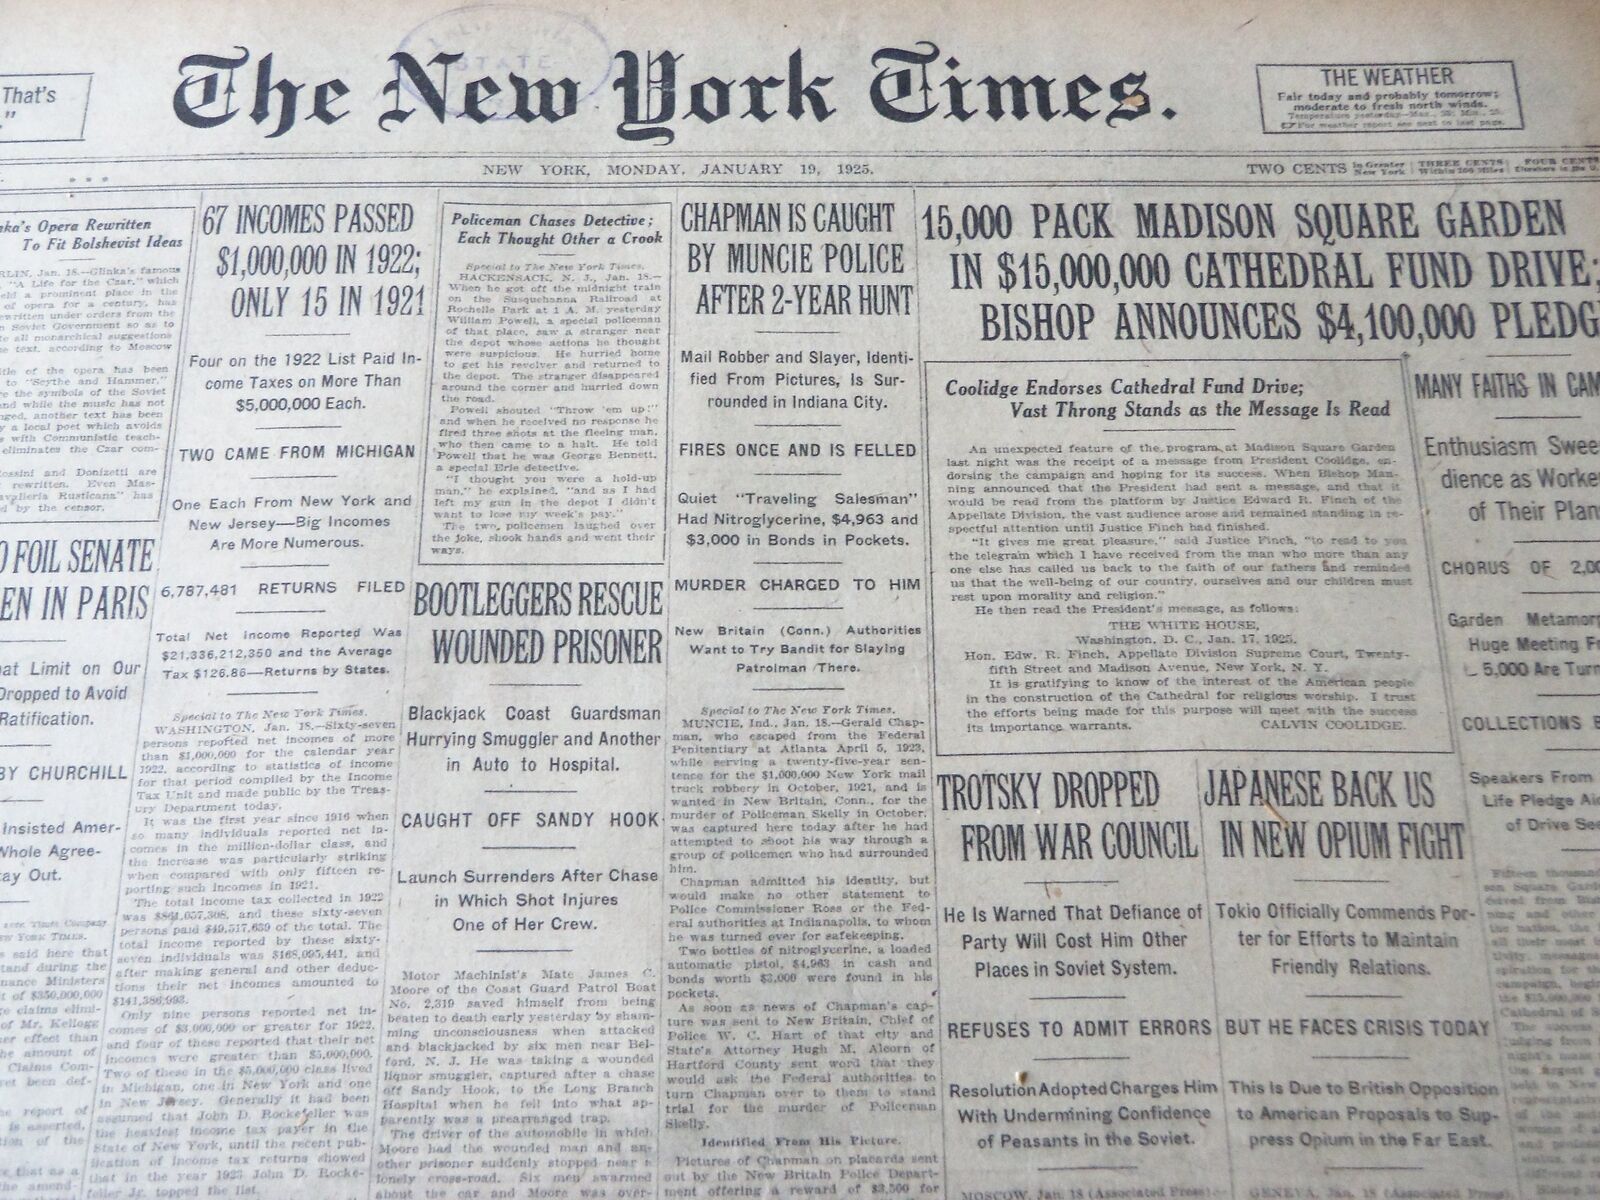 1925 JANUARY 19 NEW YORK TIMES - TROTSKY DROPPED FROM WAR COUNCIL - NT 7197